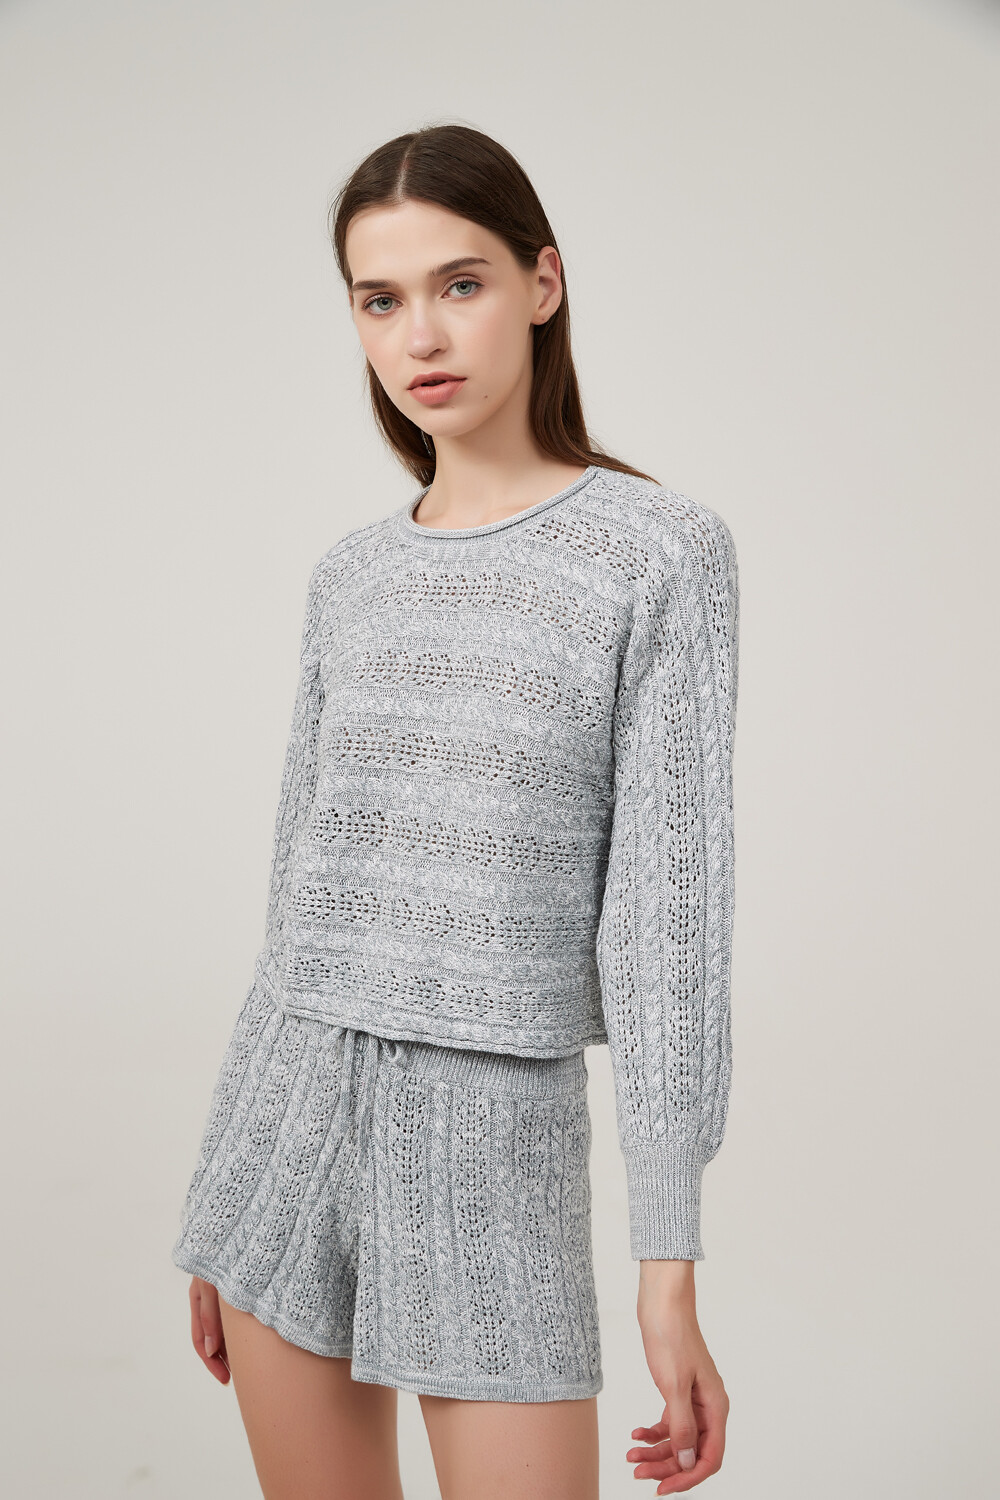 Sweater Holos Gris